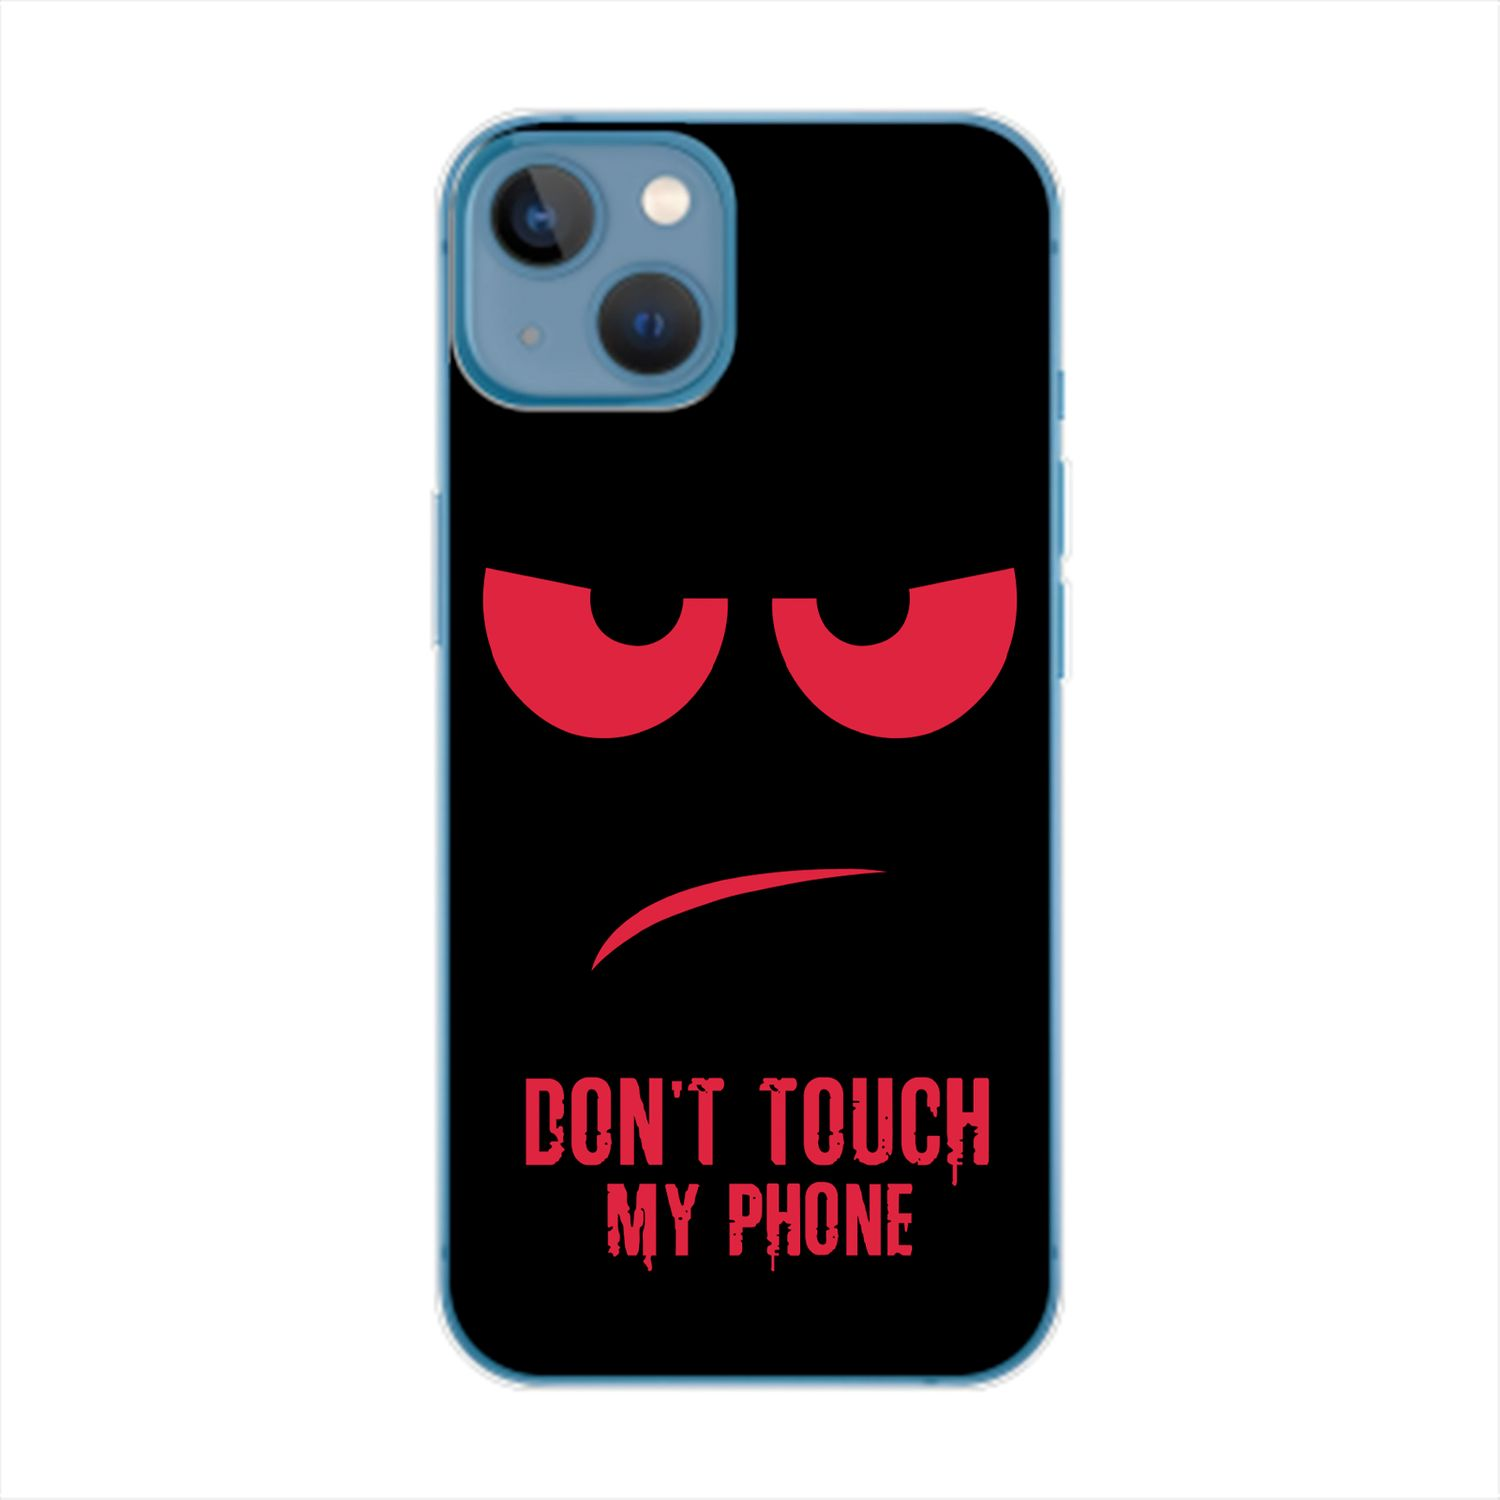 Plus, 14 Dont iPhone Backcover, KÖNIG Rot Case, Phone My DESIGN Apple, Touch